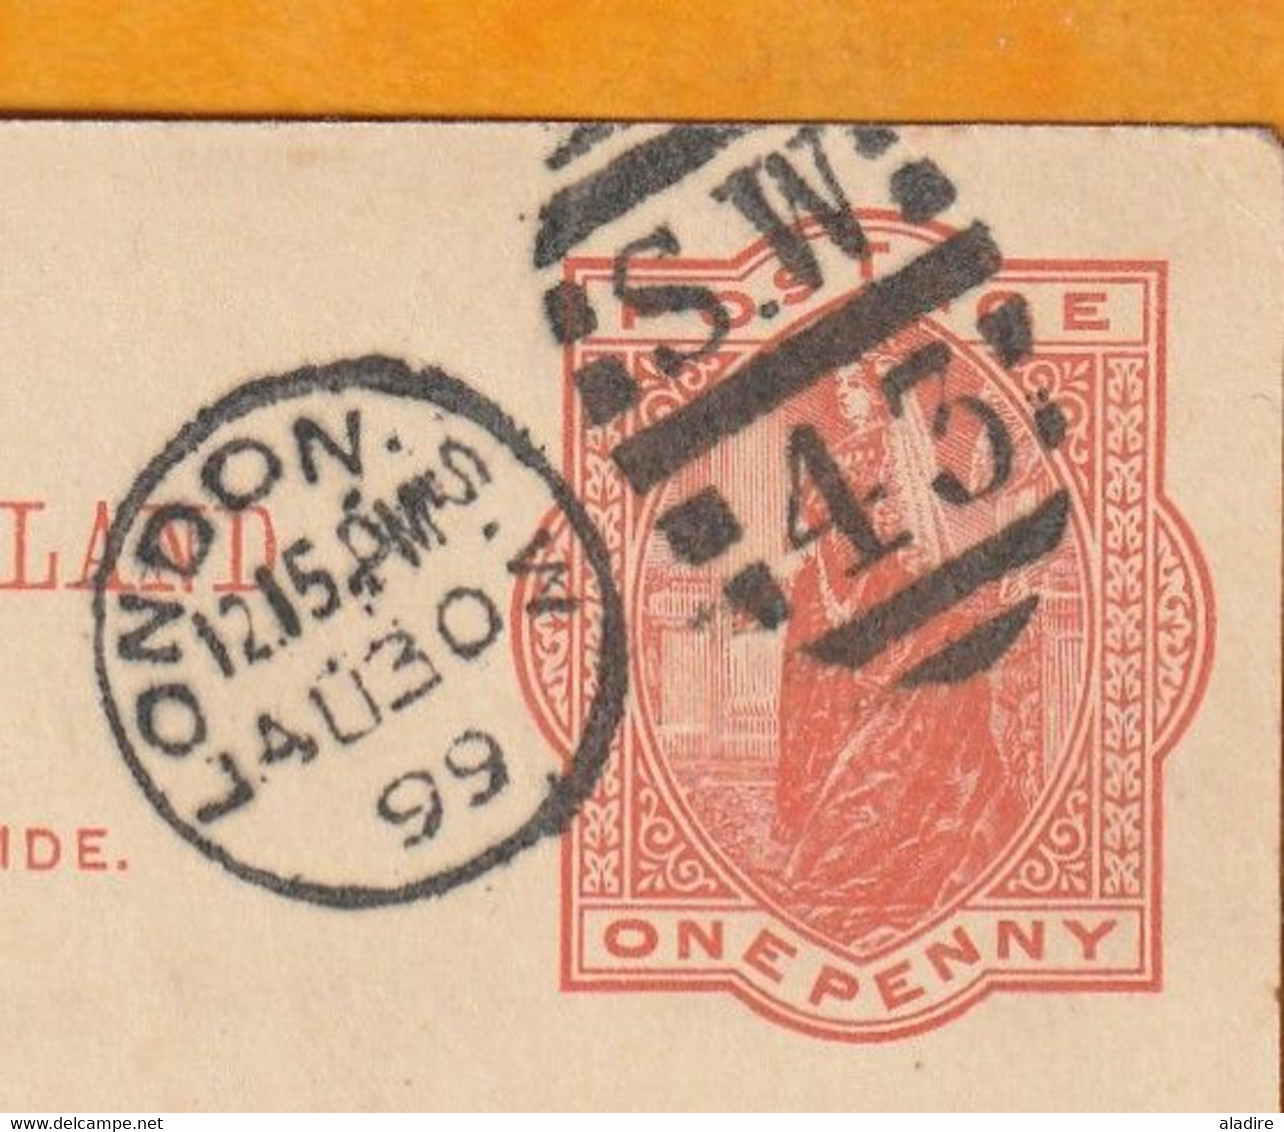 1899 - QV - GB And Ireland One Penny Post Card From London SW To Calais, France - Arrival Stamp - Entiers Postaux